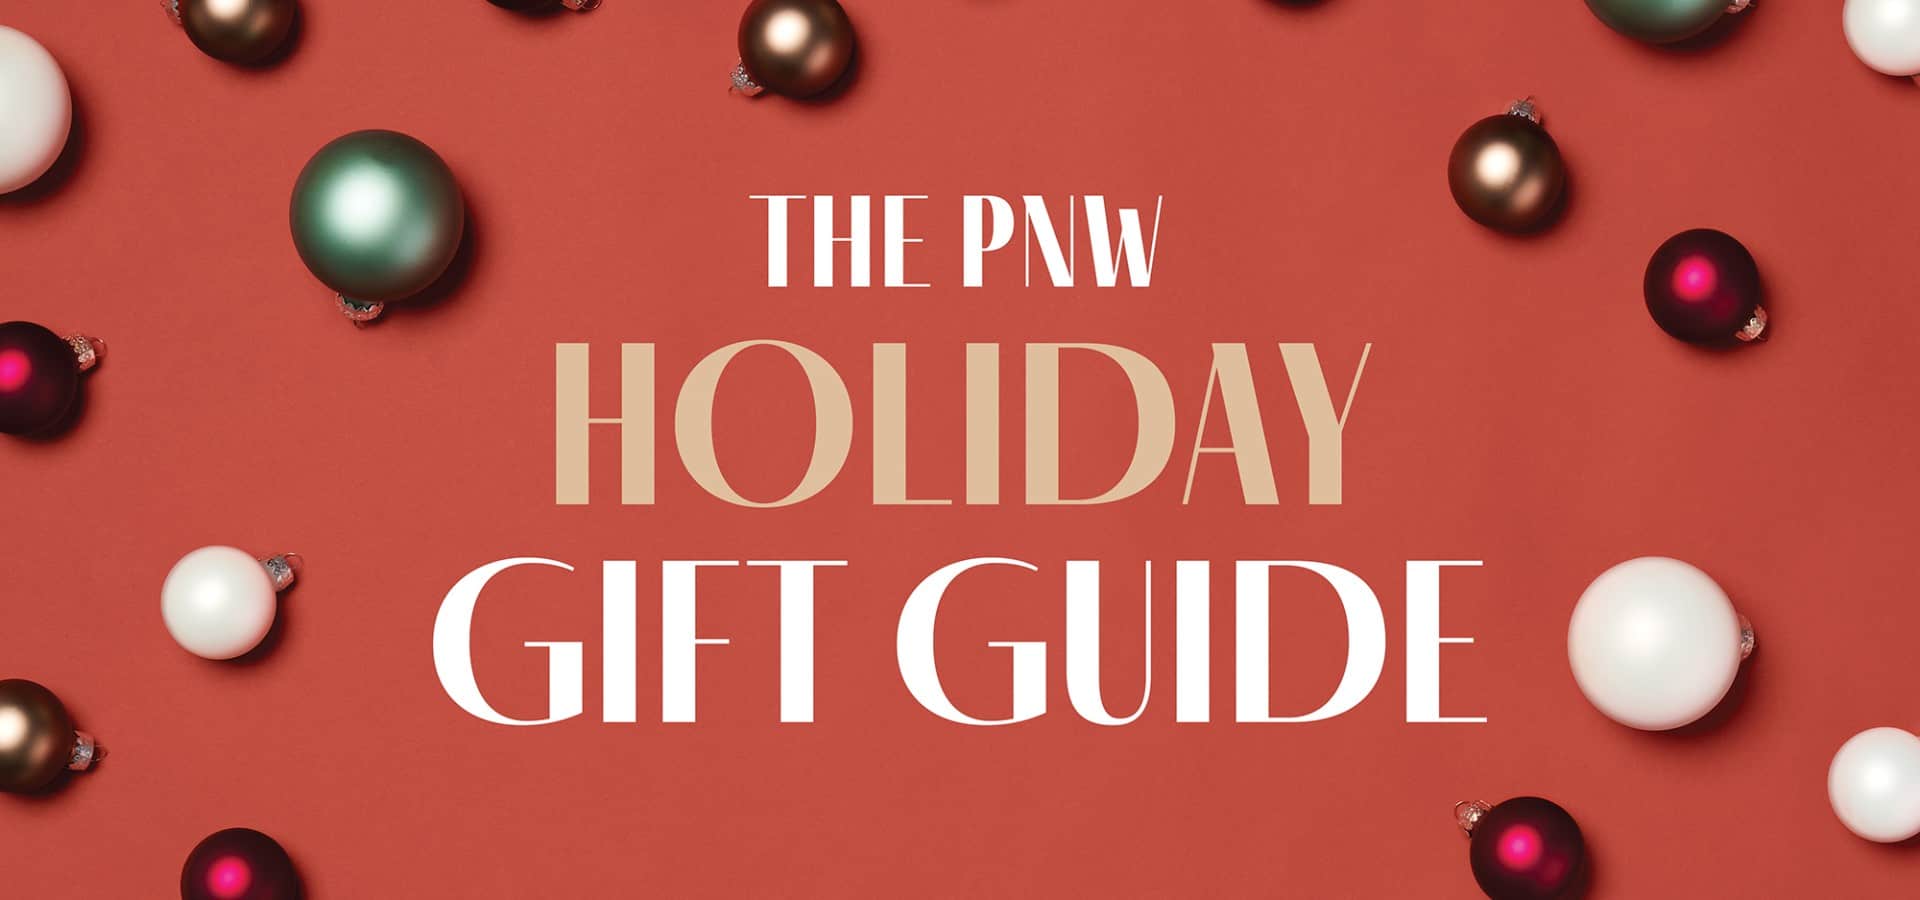 The PNW Holiday Gift Guide 2021